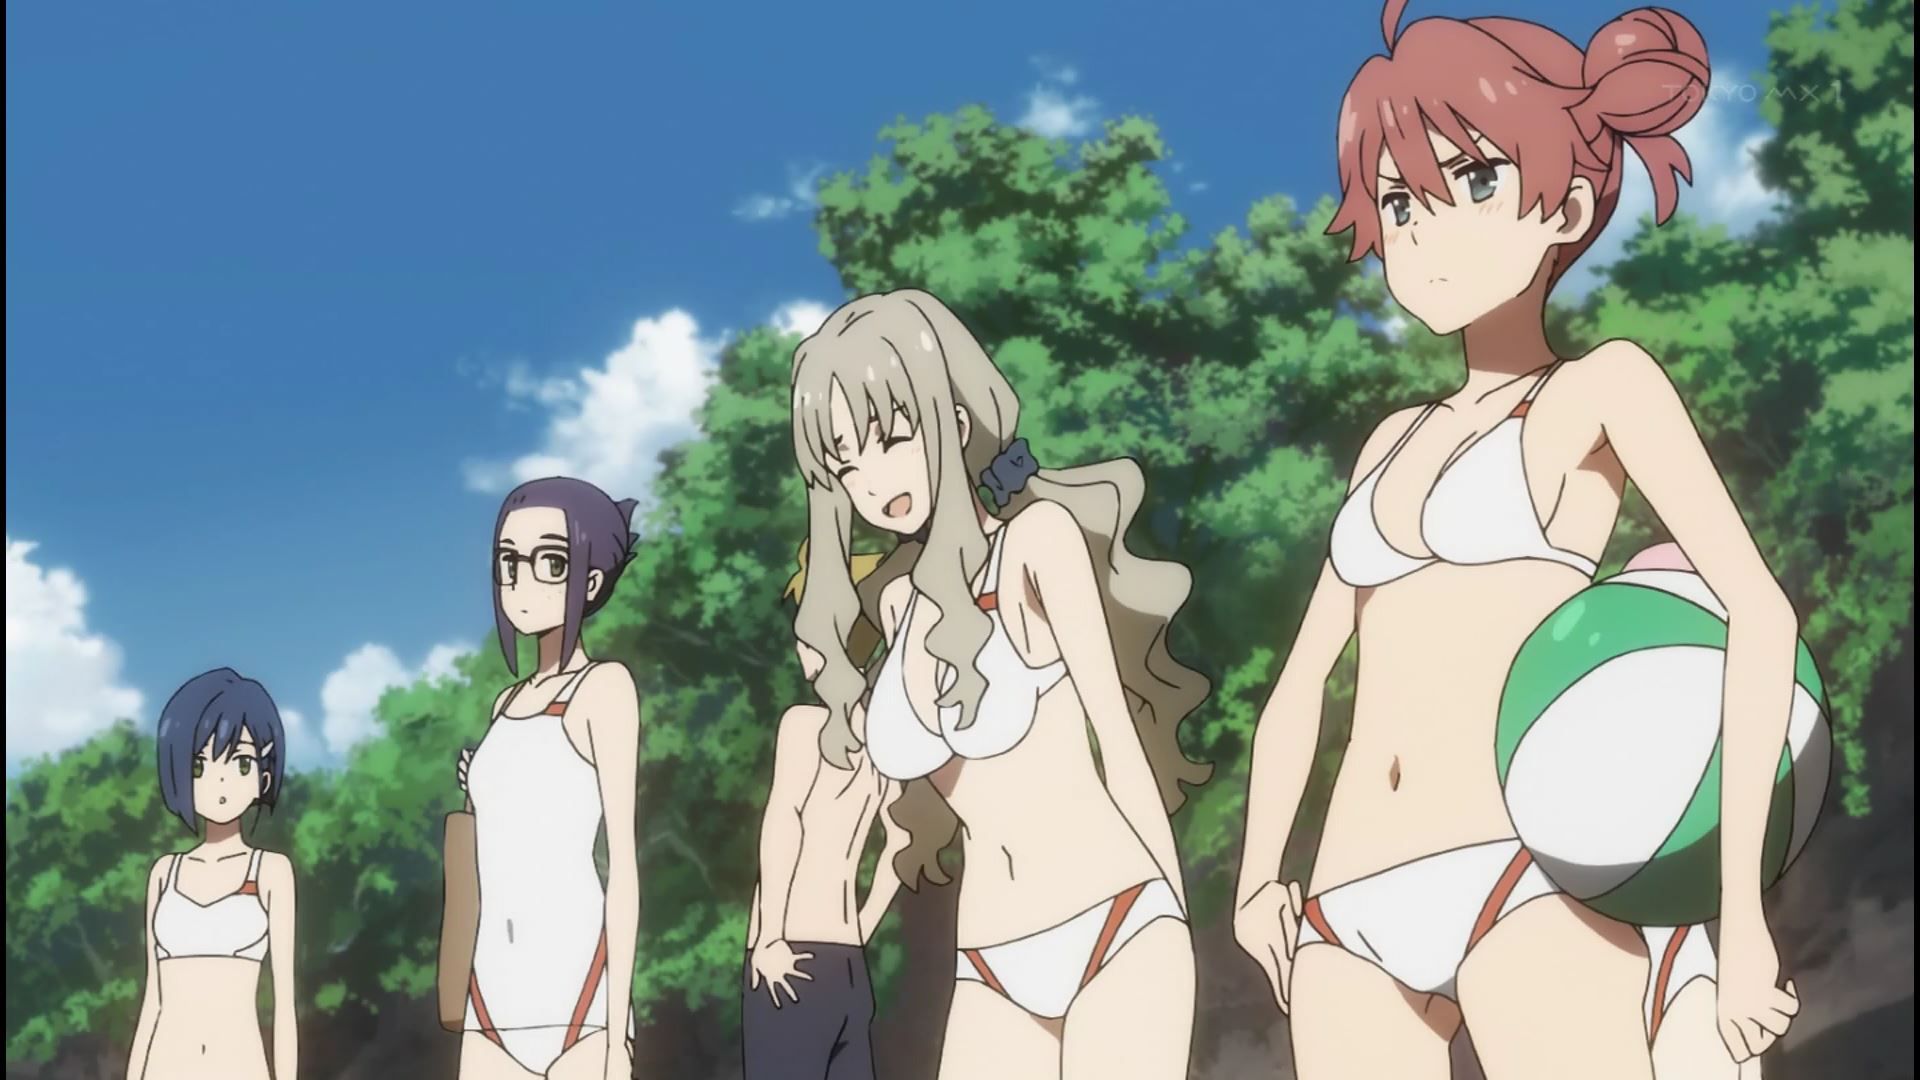 Anime [Darling in the franc kiss] seven girls erotic breasts and buttocks swimsuit times in the story! 2